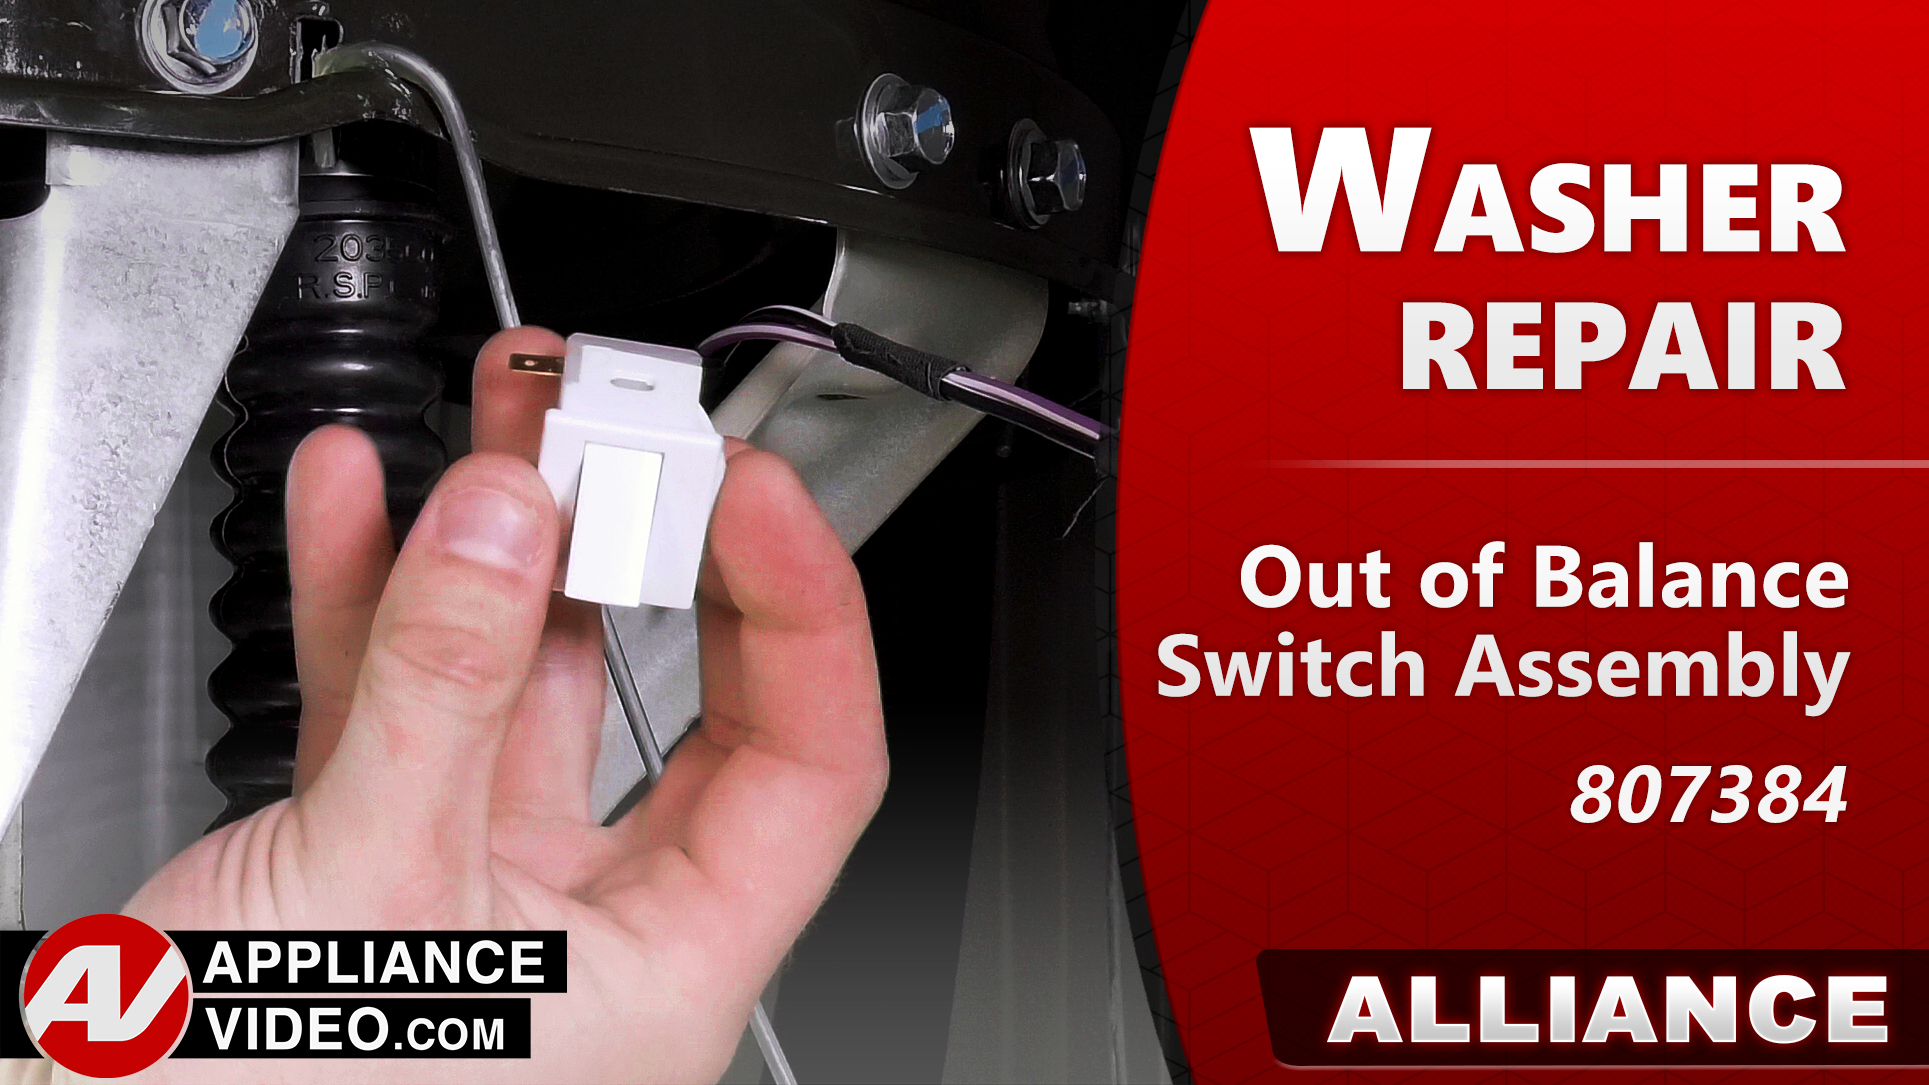 Speed Queen – Alliance AWN63RSN116TW01 Washer – No start – Out-of-Balance Switch